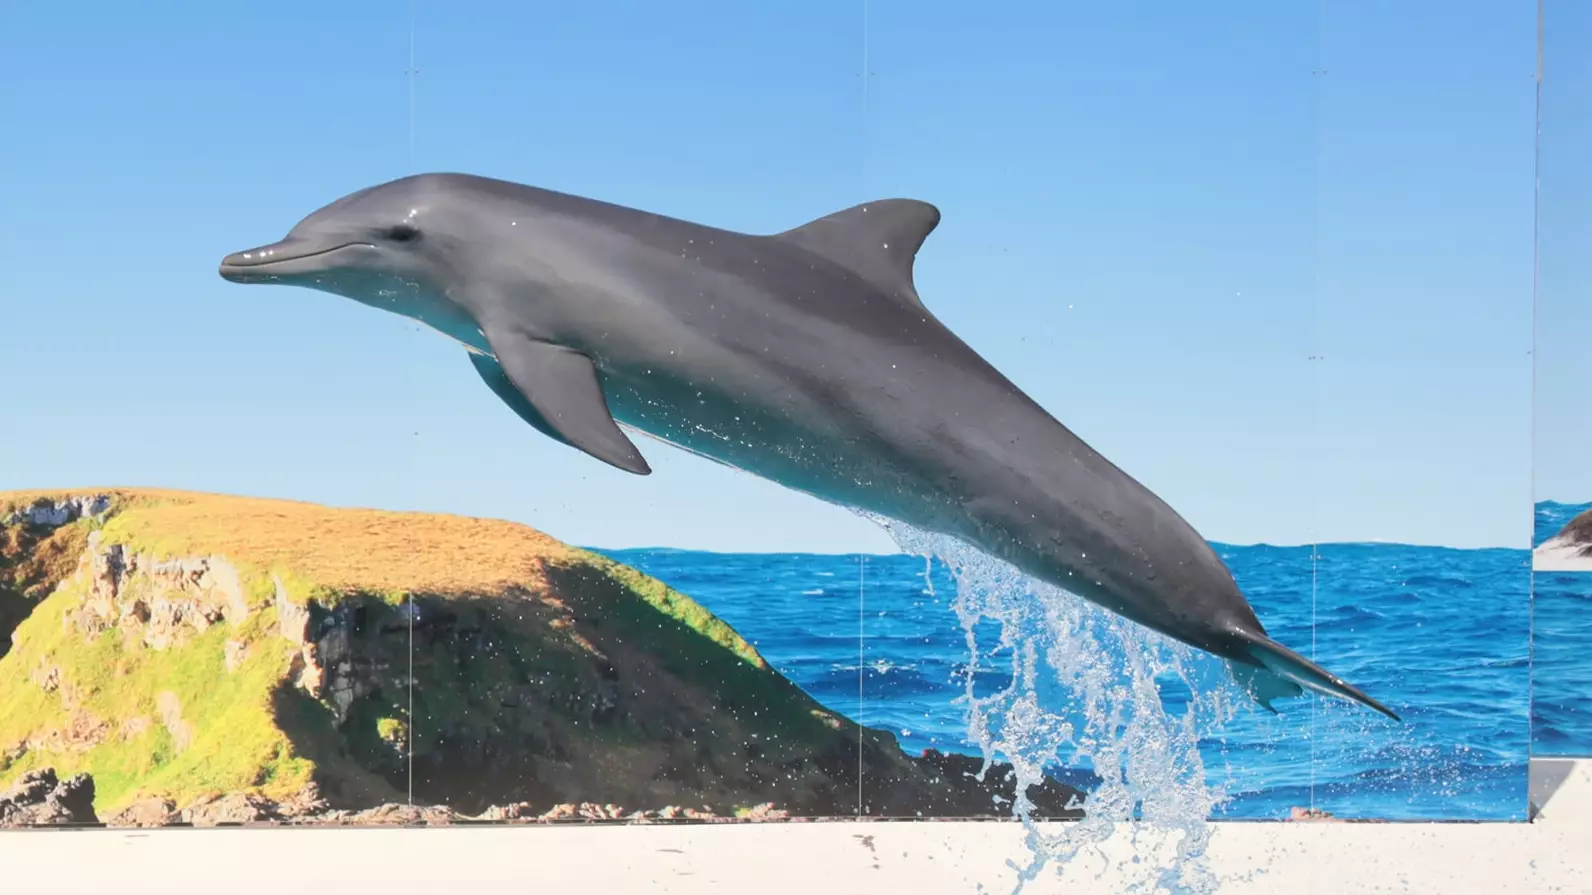 All Performing Dolphins In NSW Should Be Sent To Sanctuaries, Report Recommends